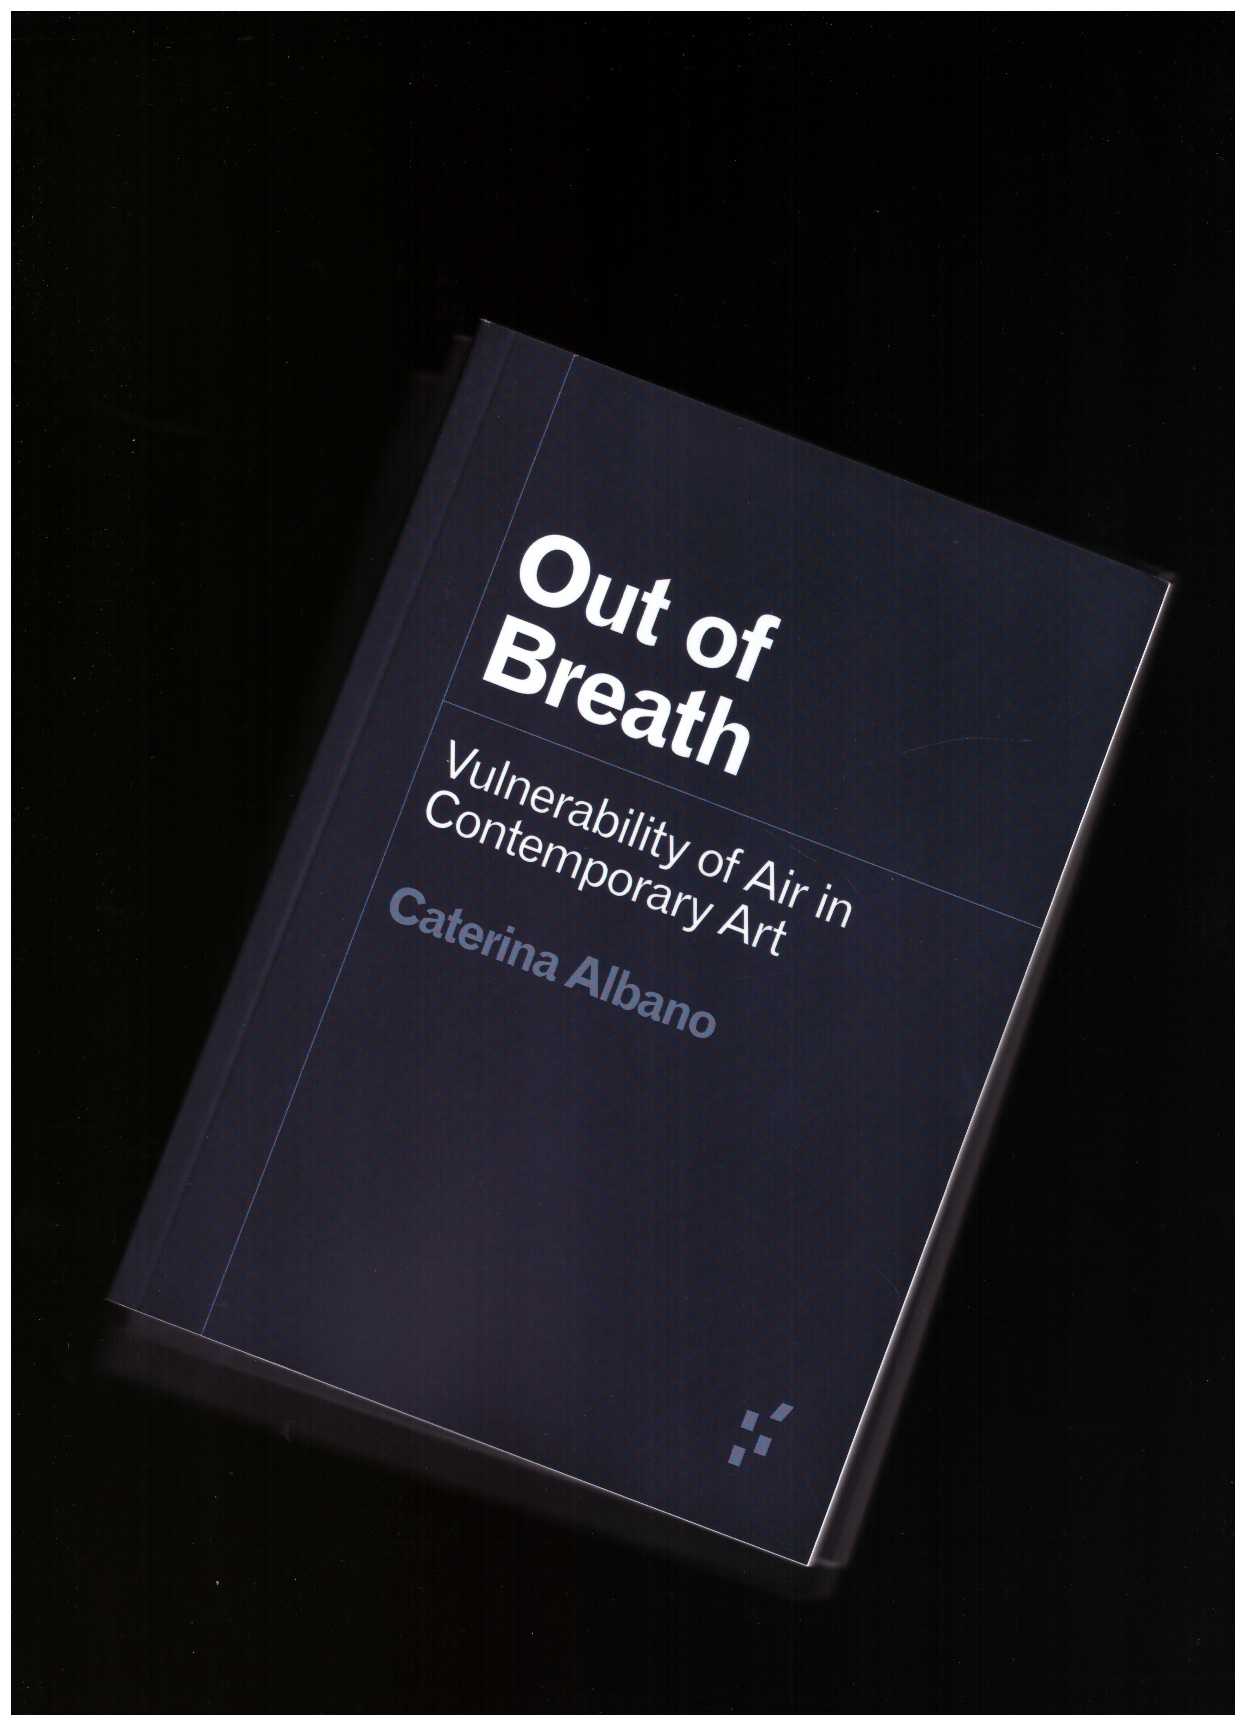 ALBANO, Caterina - Out of Breath. Vulnerability of Air in Contemporary Art